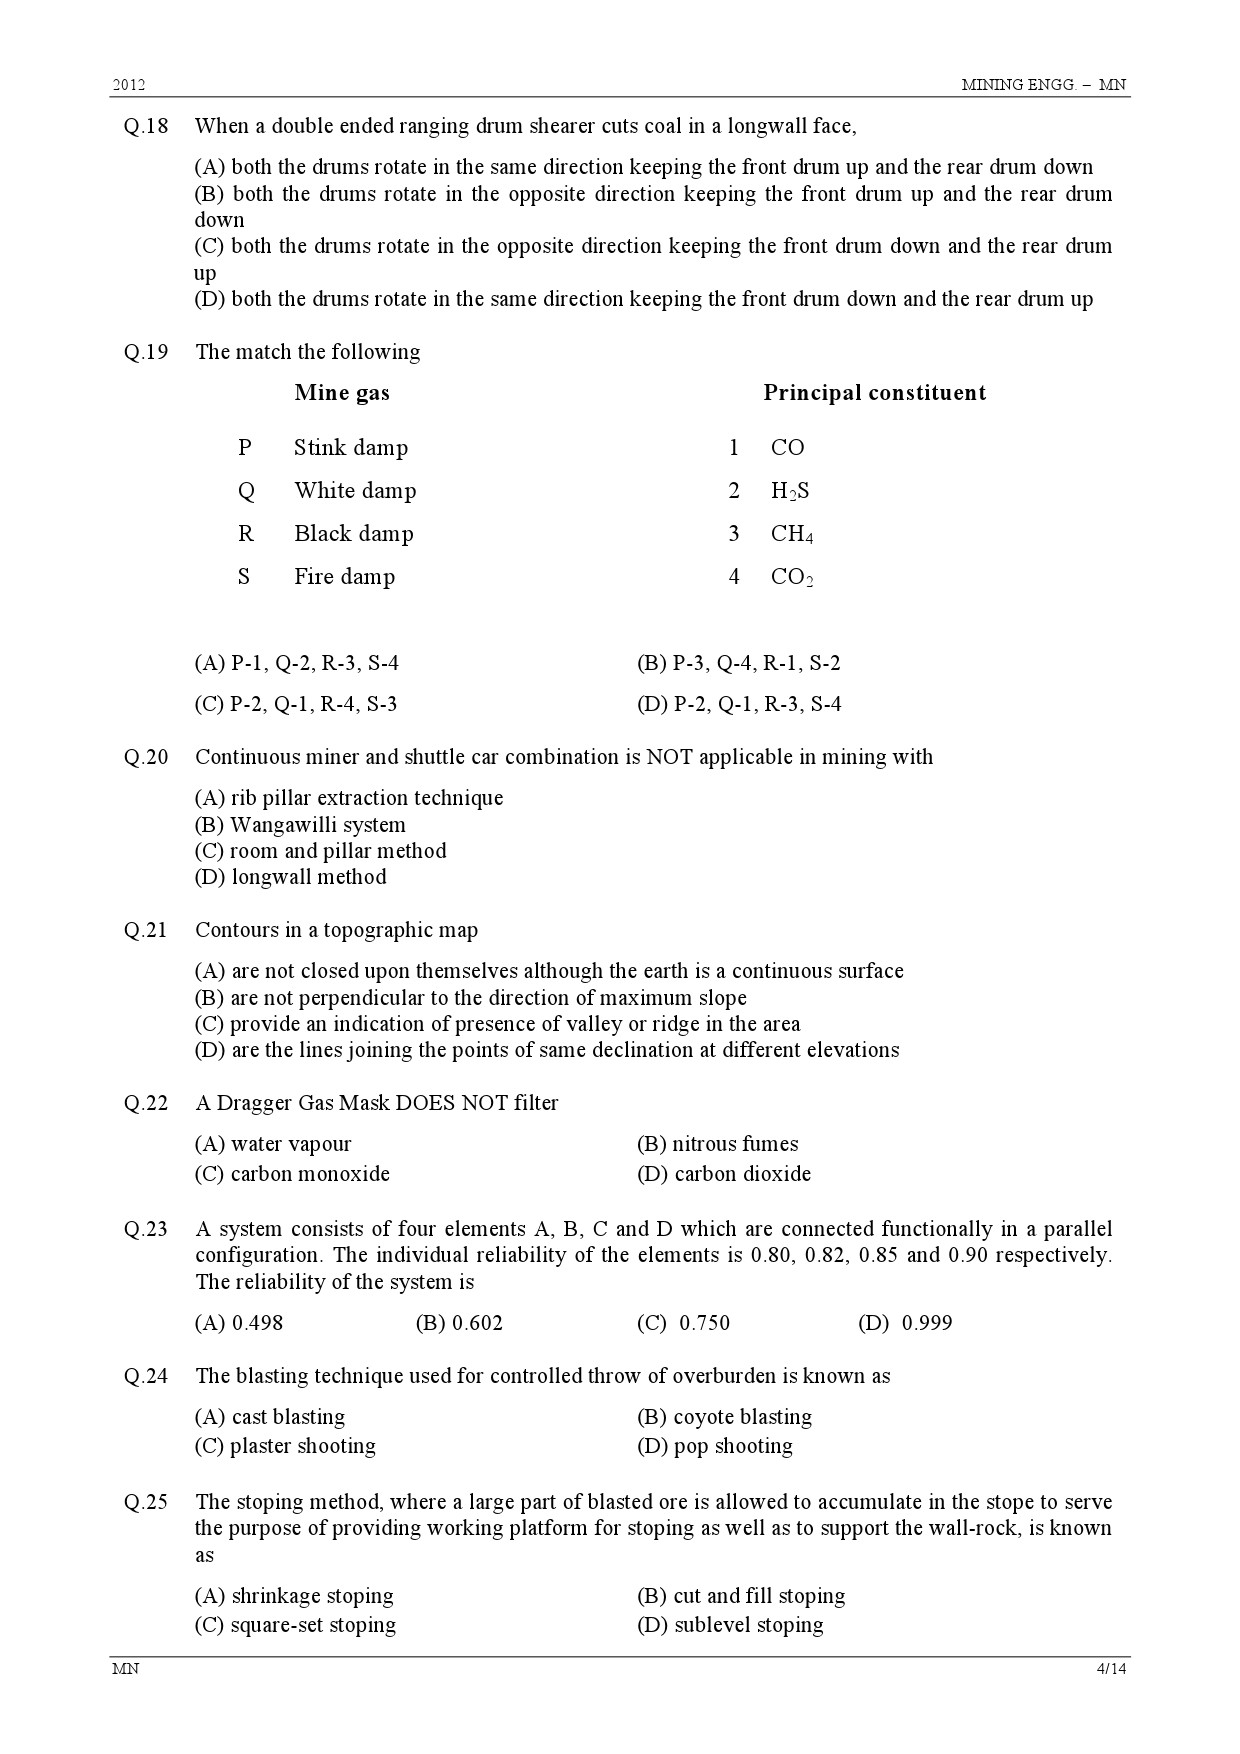 GATE Exam Question Paper 2012 Mining Engineering 4